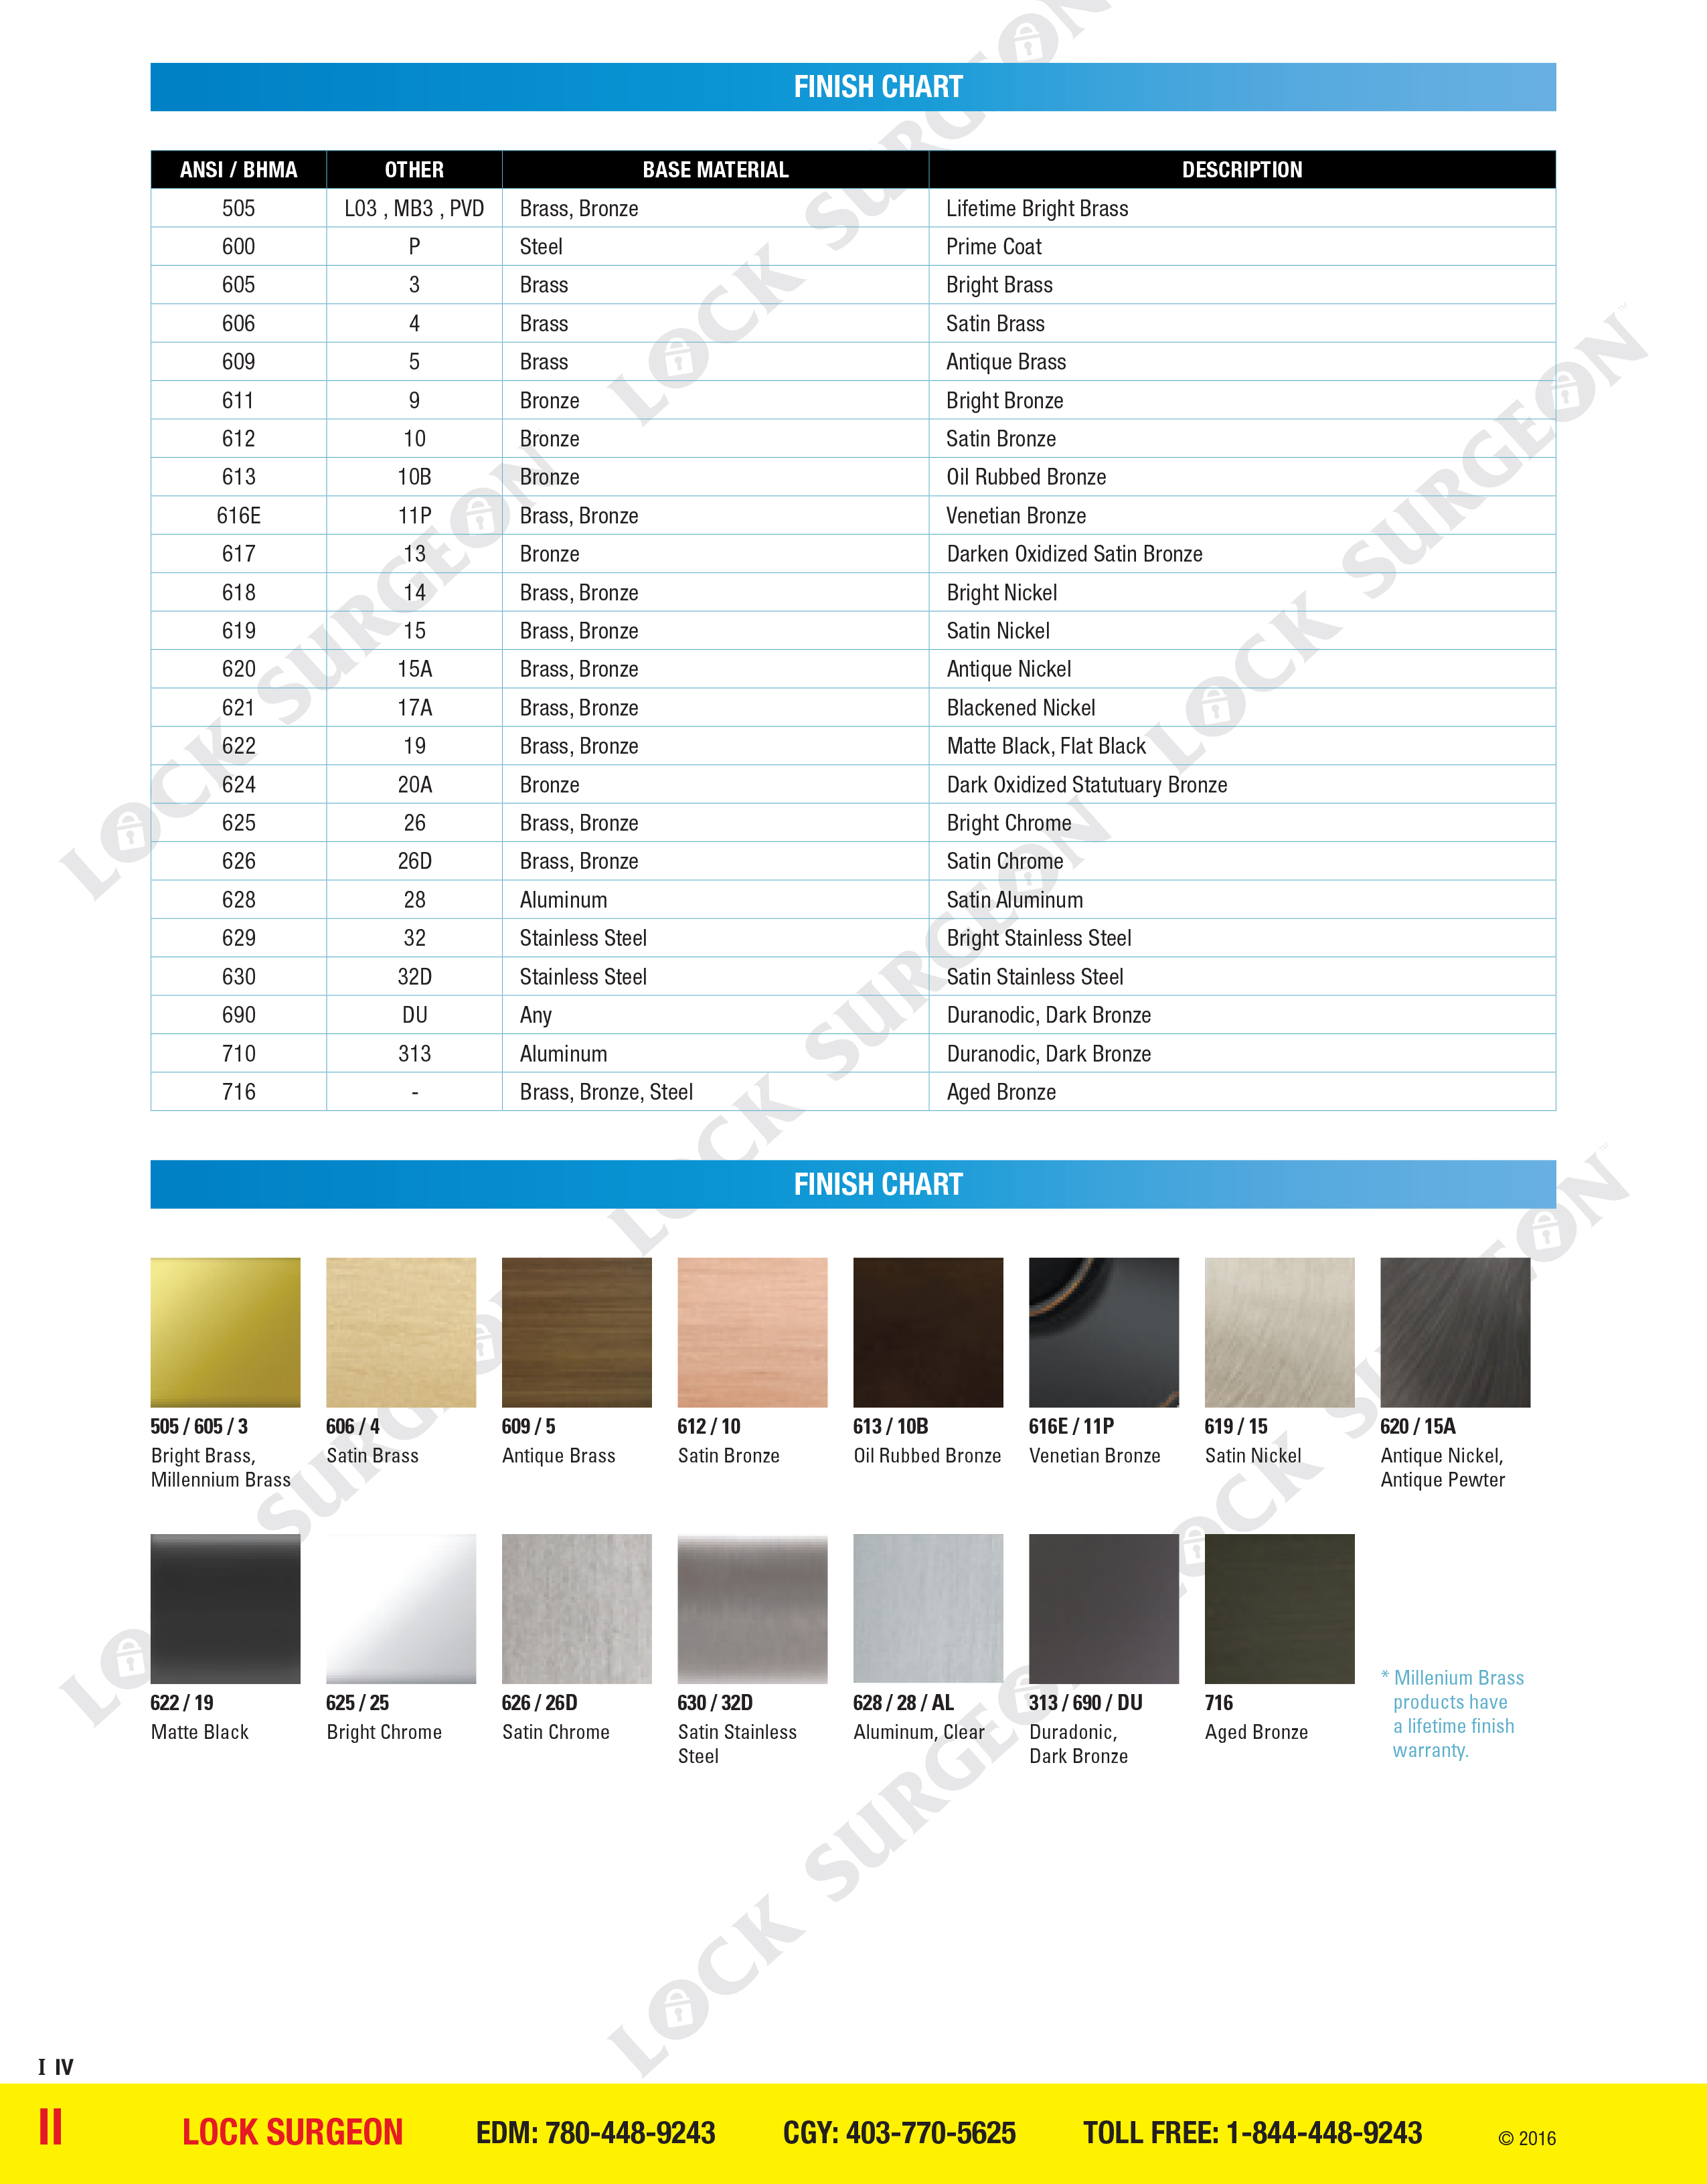 Colour reference chart for colour finishes on door handle hardware products.